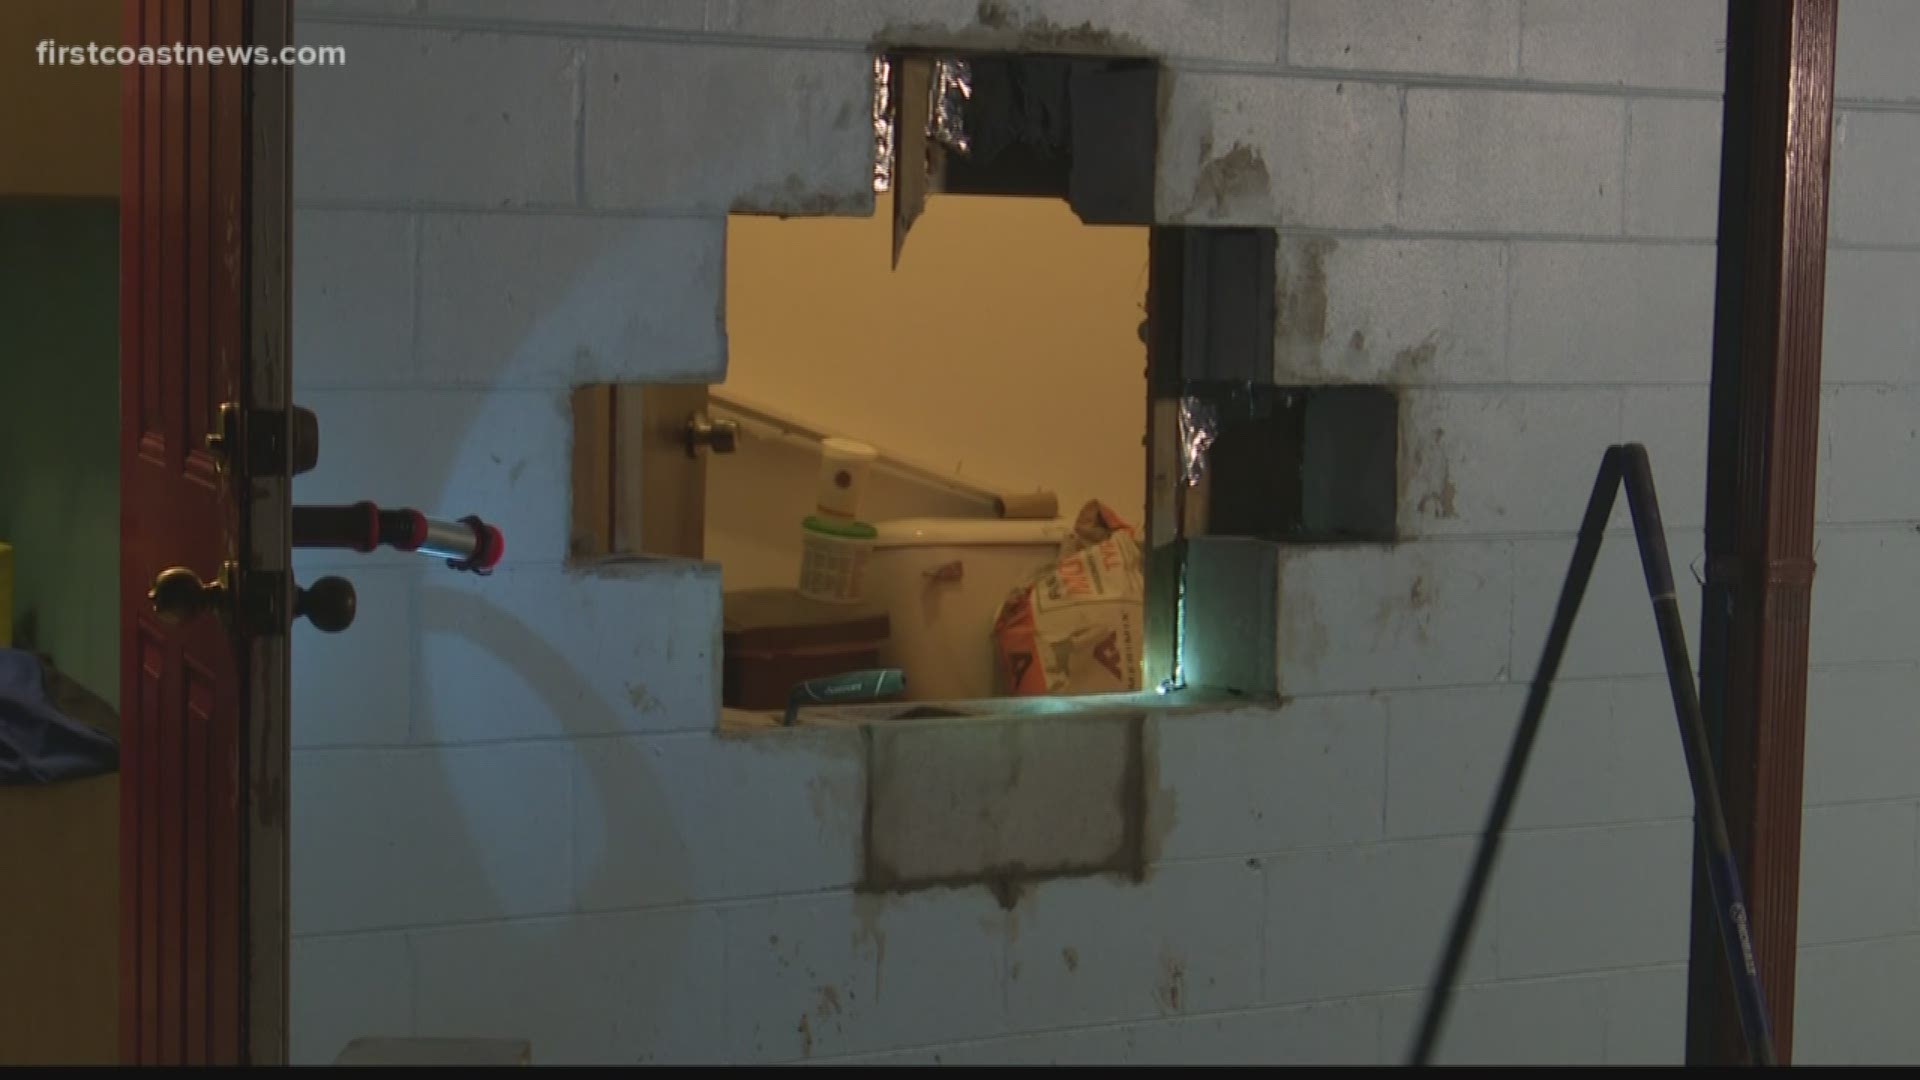 Around 7 p.m., Juzt Kidz Learning Centers, was broken into for a second time.